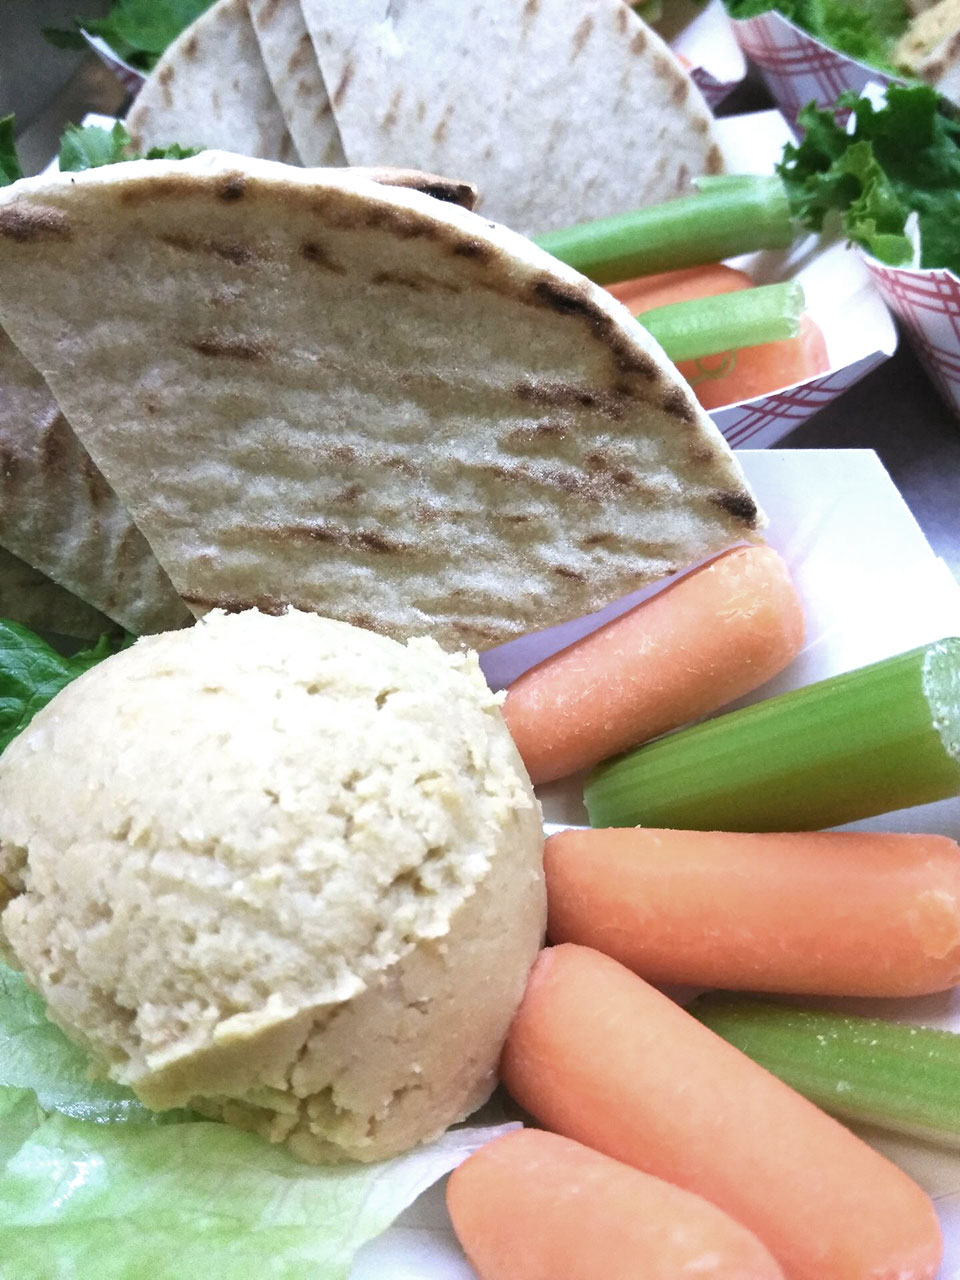 Vegan hummus plate with carrots, celery, and pita bread